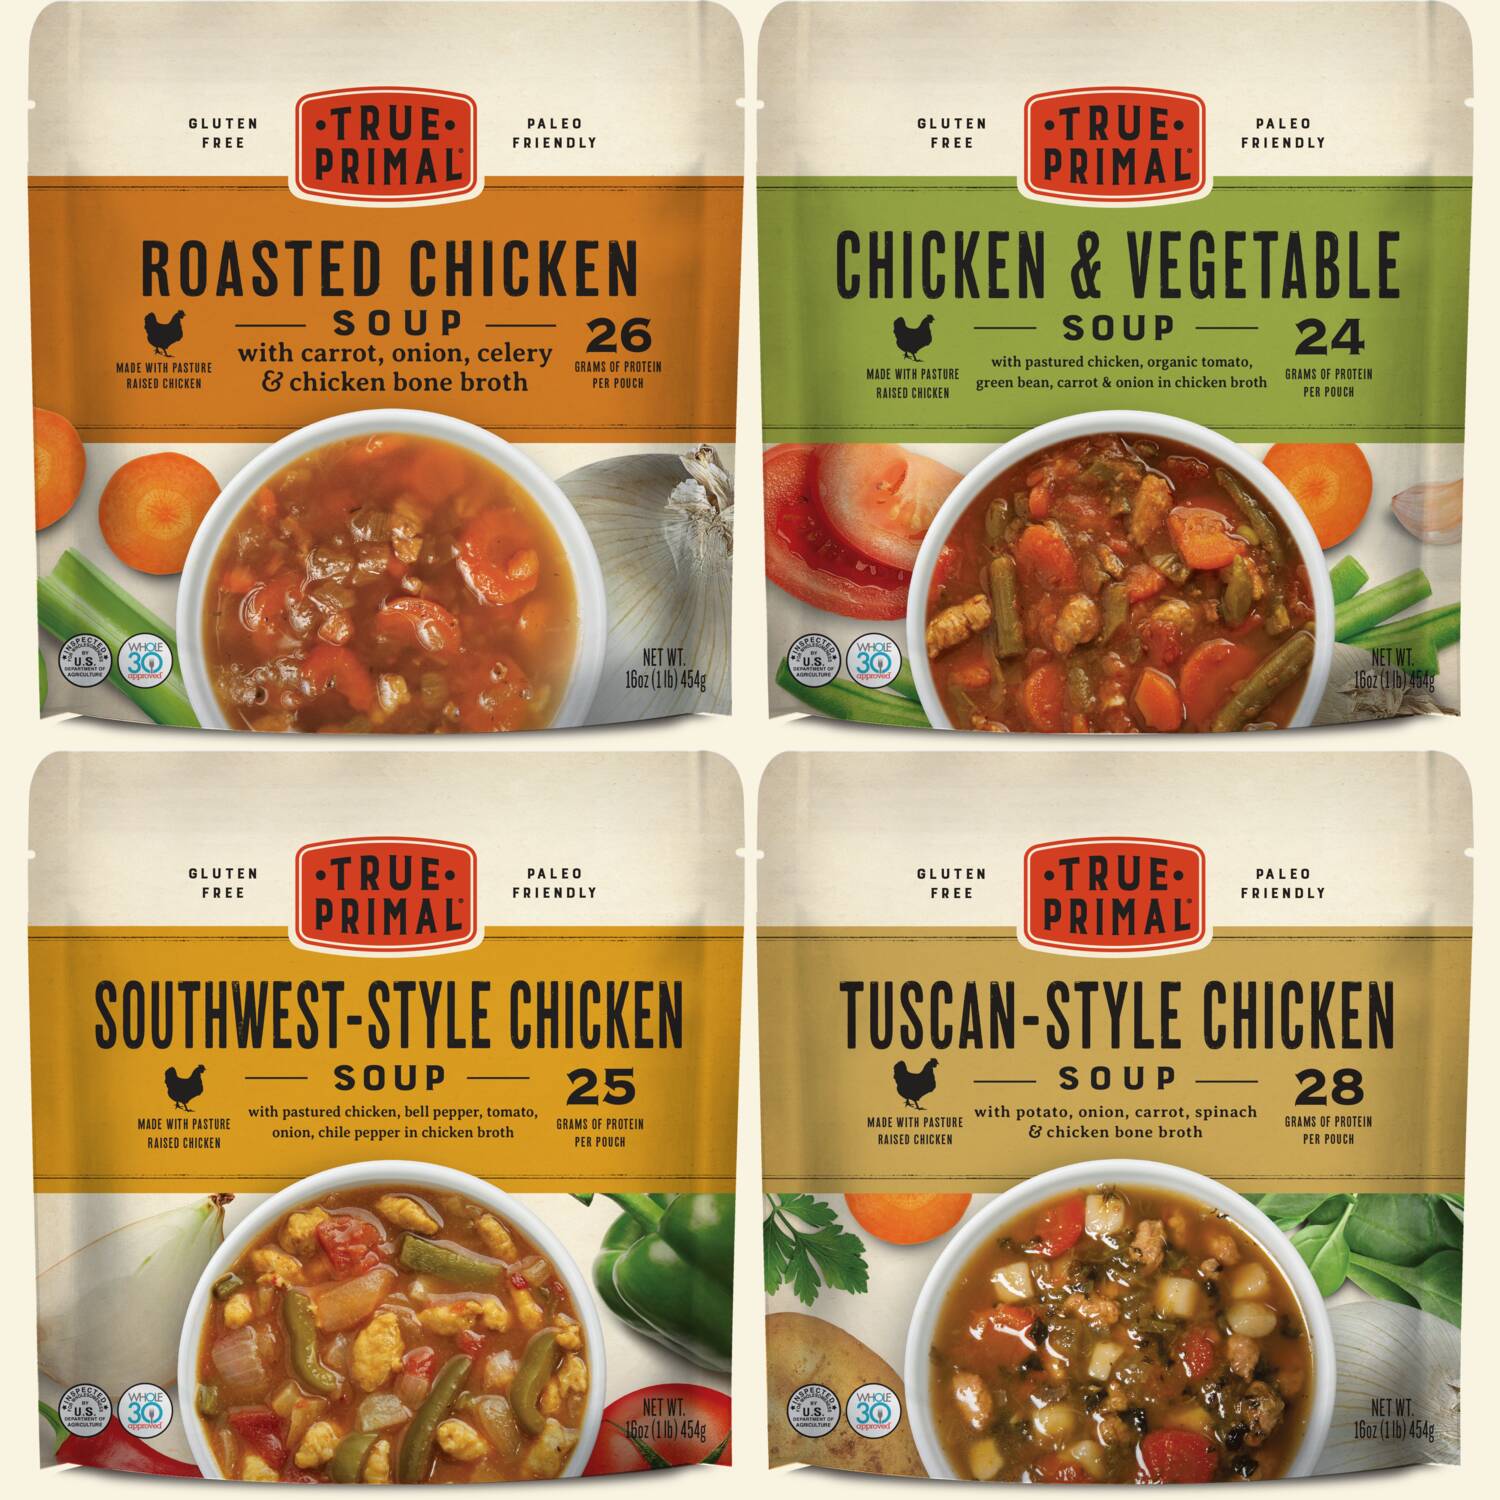 Roasted Chicken Soup, Chicken & Vegetable Soup, Southwest-Style Chicken Soup, Tuscan-Style Chicken Soup